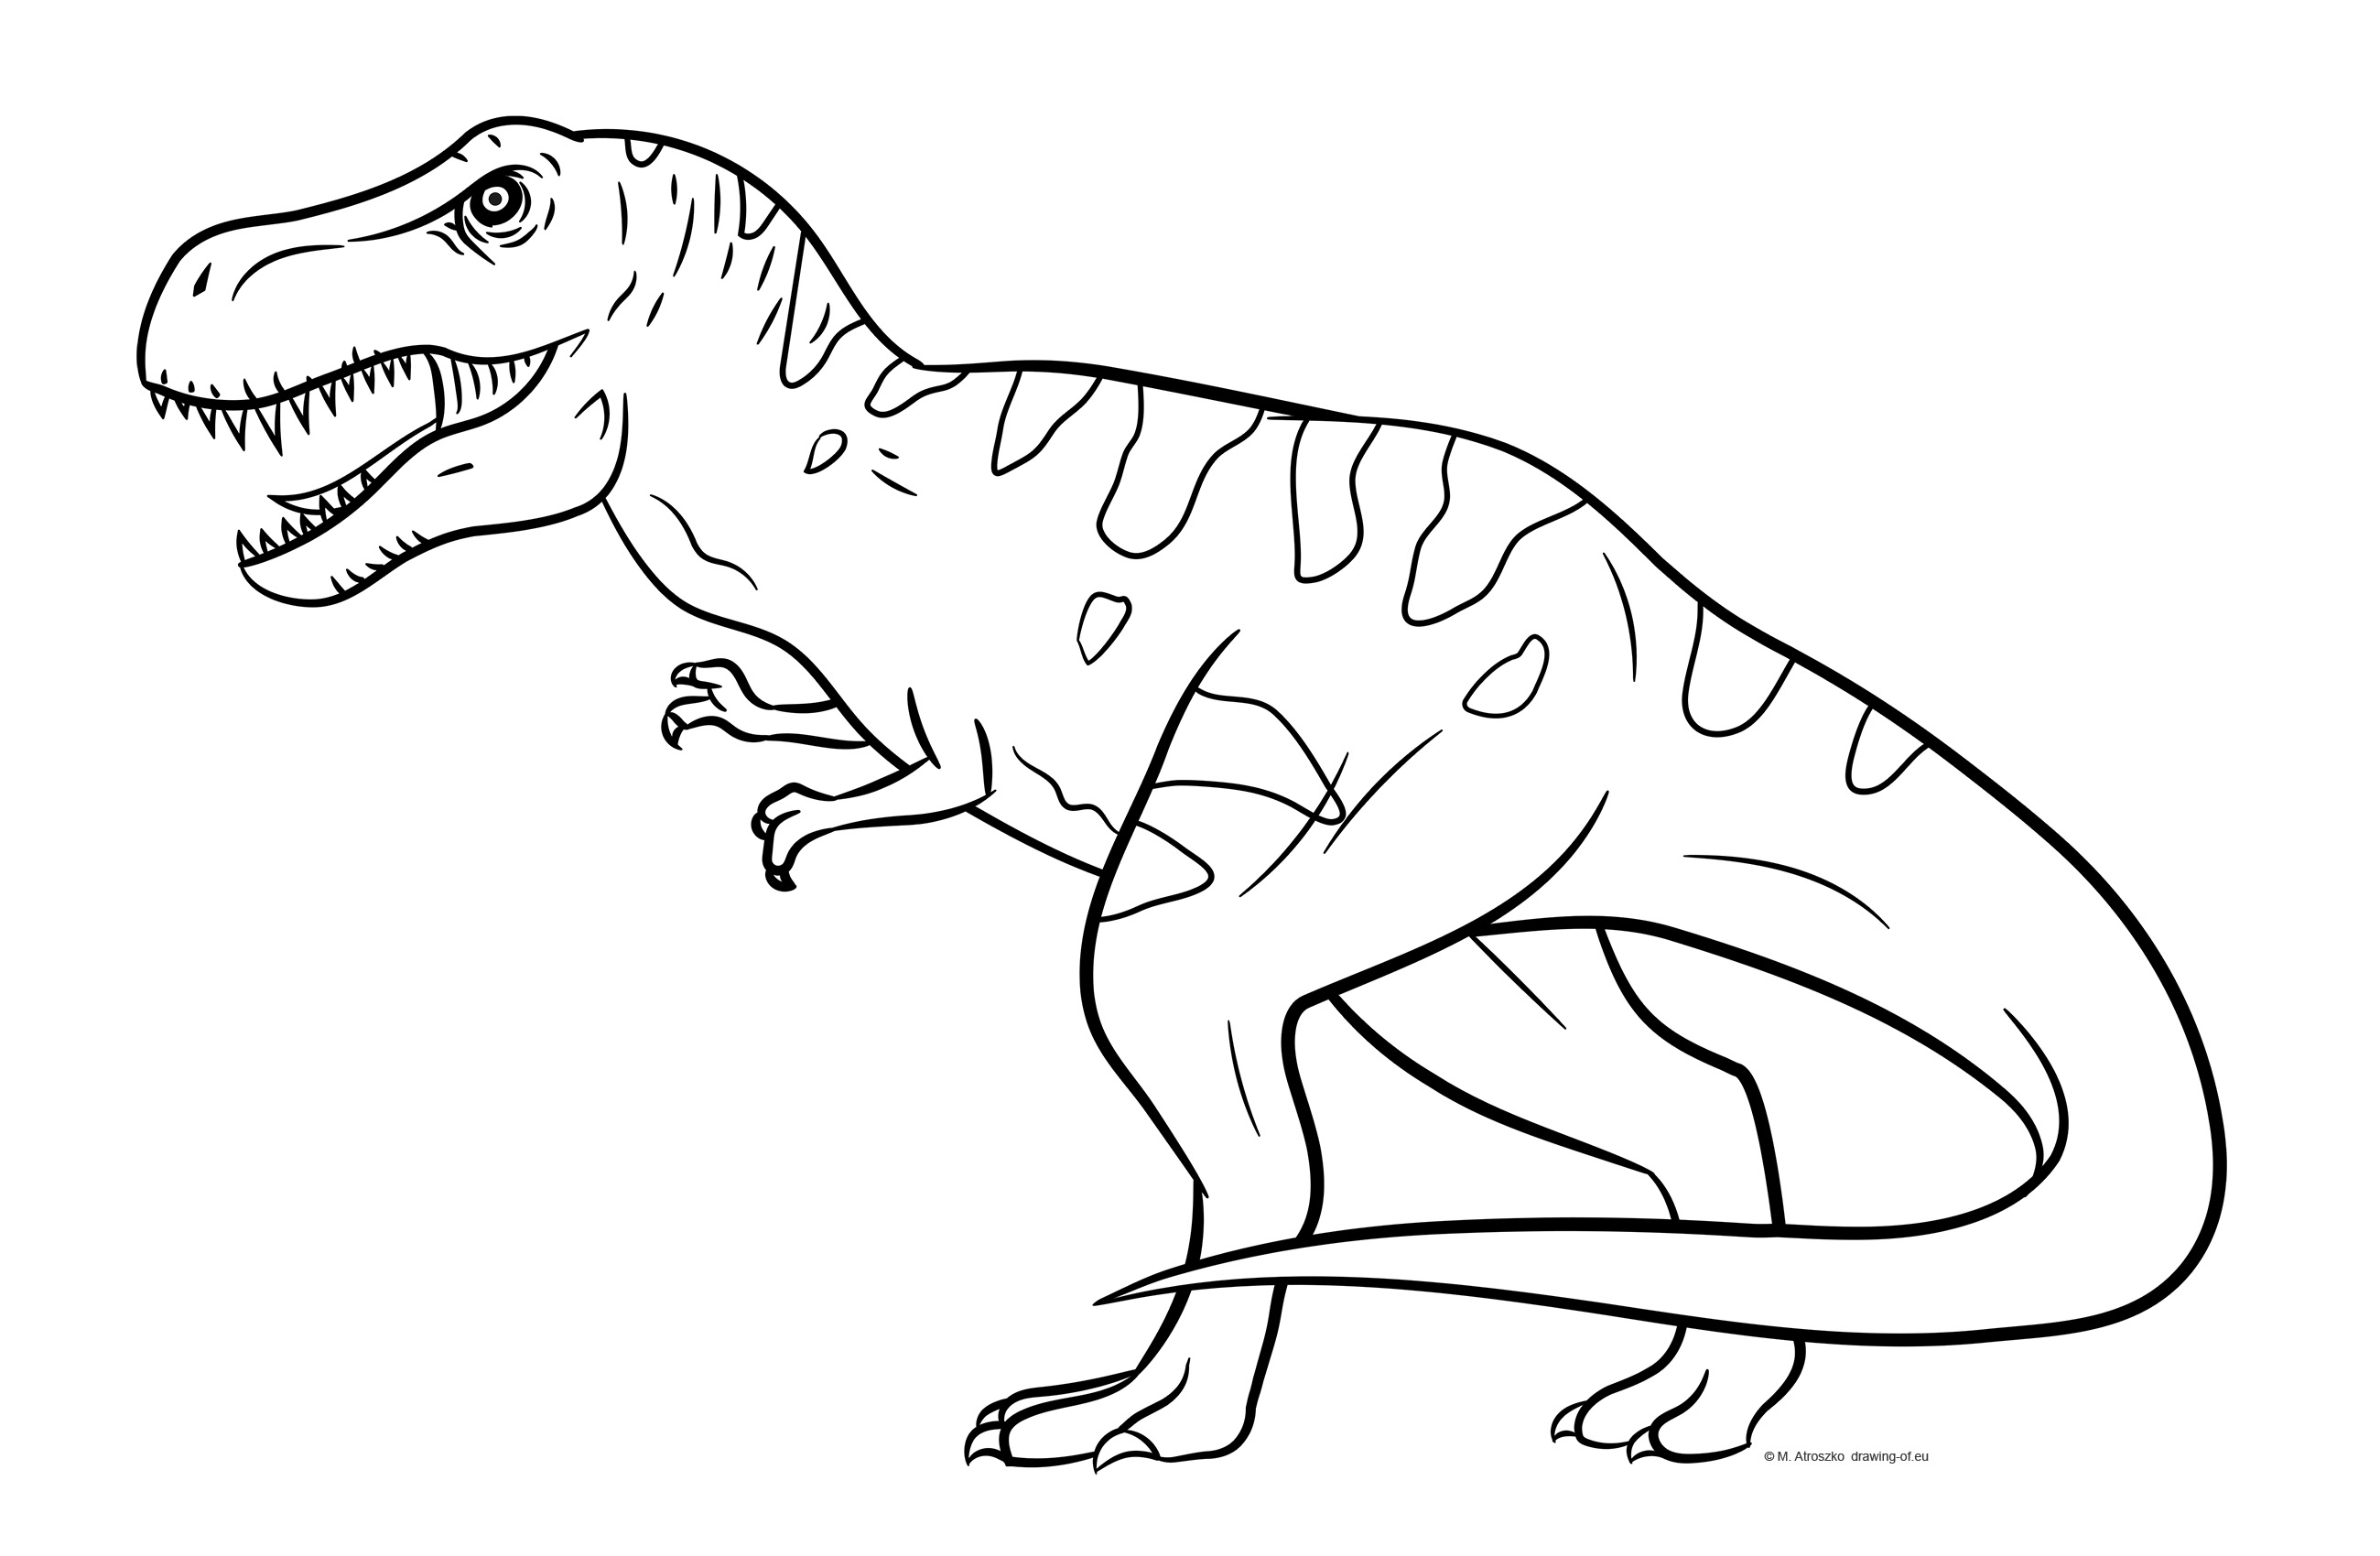 Tyrannosaurus Rex coloring pages